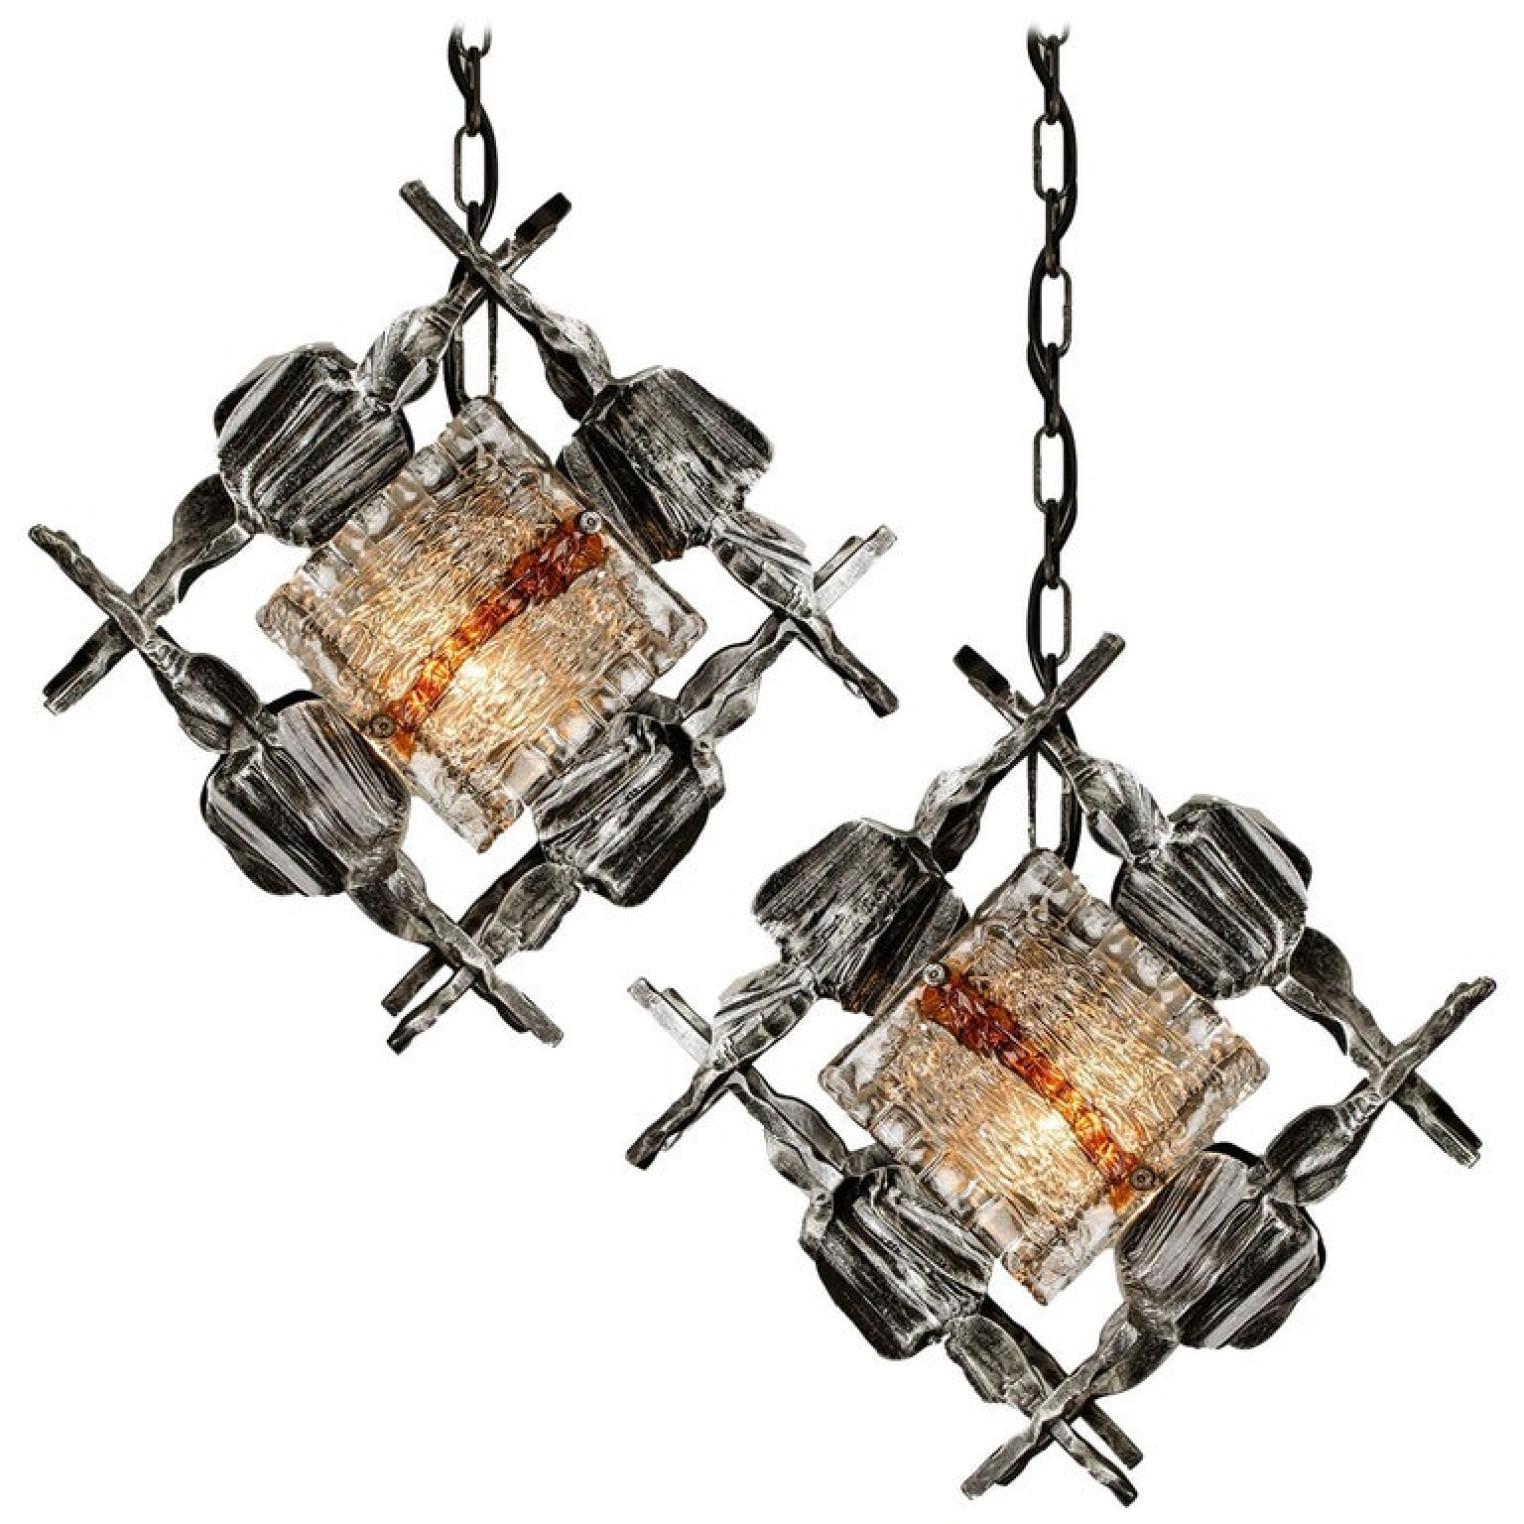 A set of Brutalist pedant light fixtures by Tom Ahlström & Hans Ehrlich, Sweden, 1960s,
A absolute strong and sculptural design!

The handwrought iron surround has a good patination and is set off by the Murano ice glass with its clear and amber